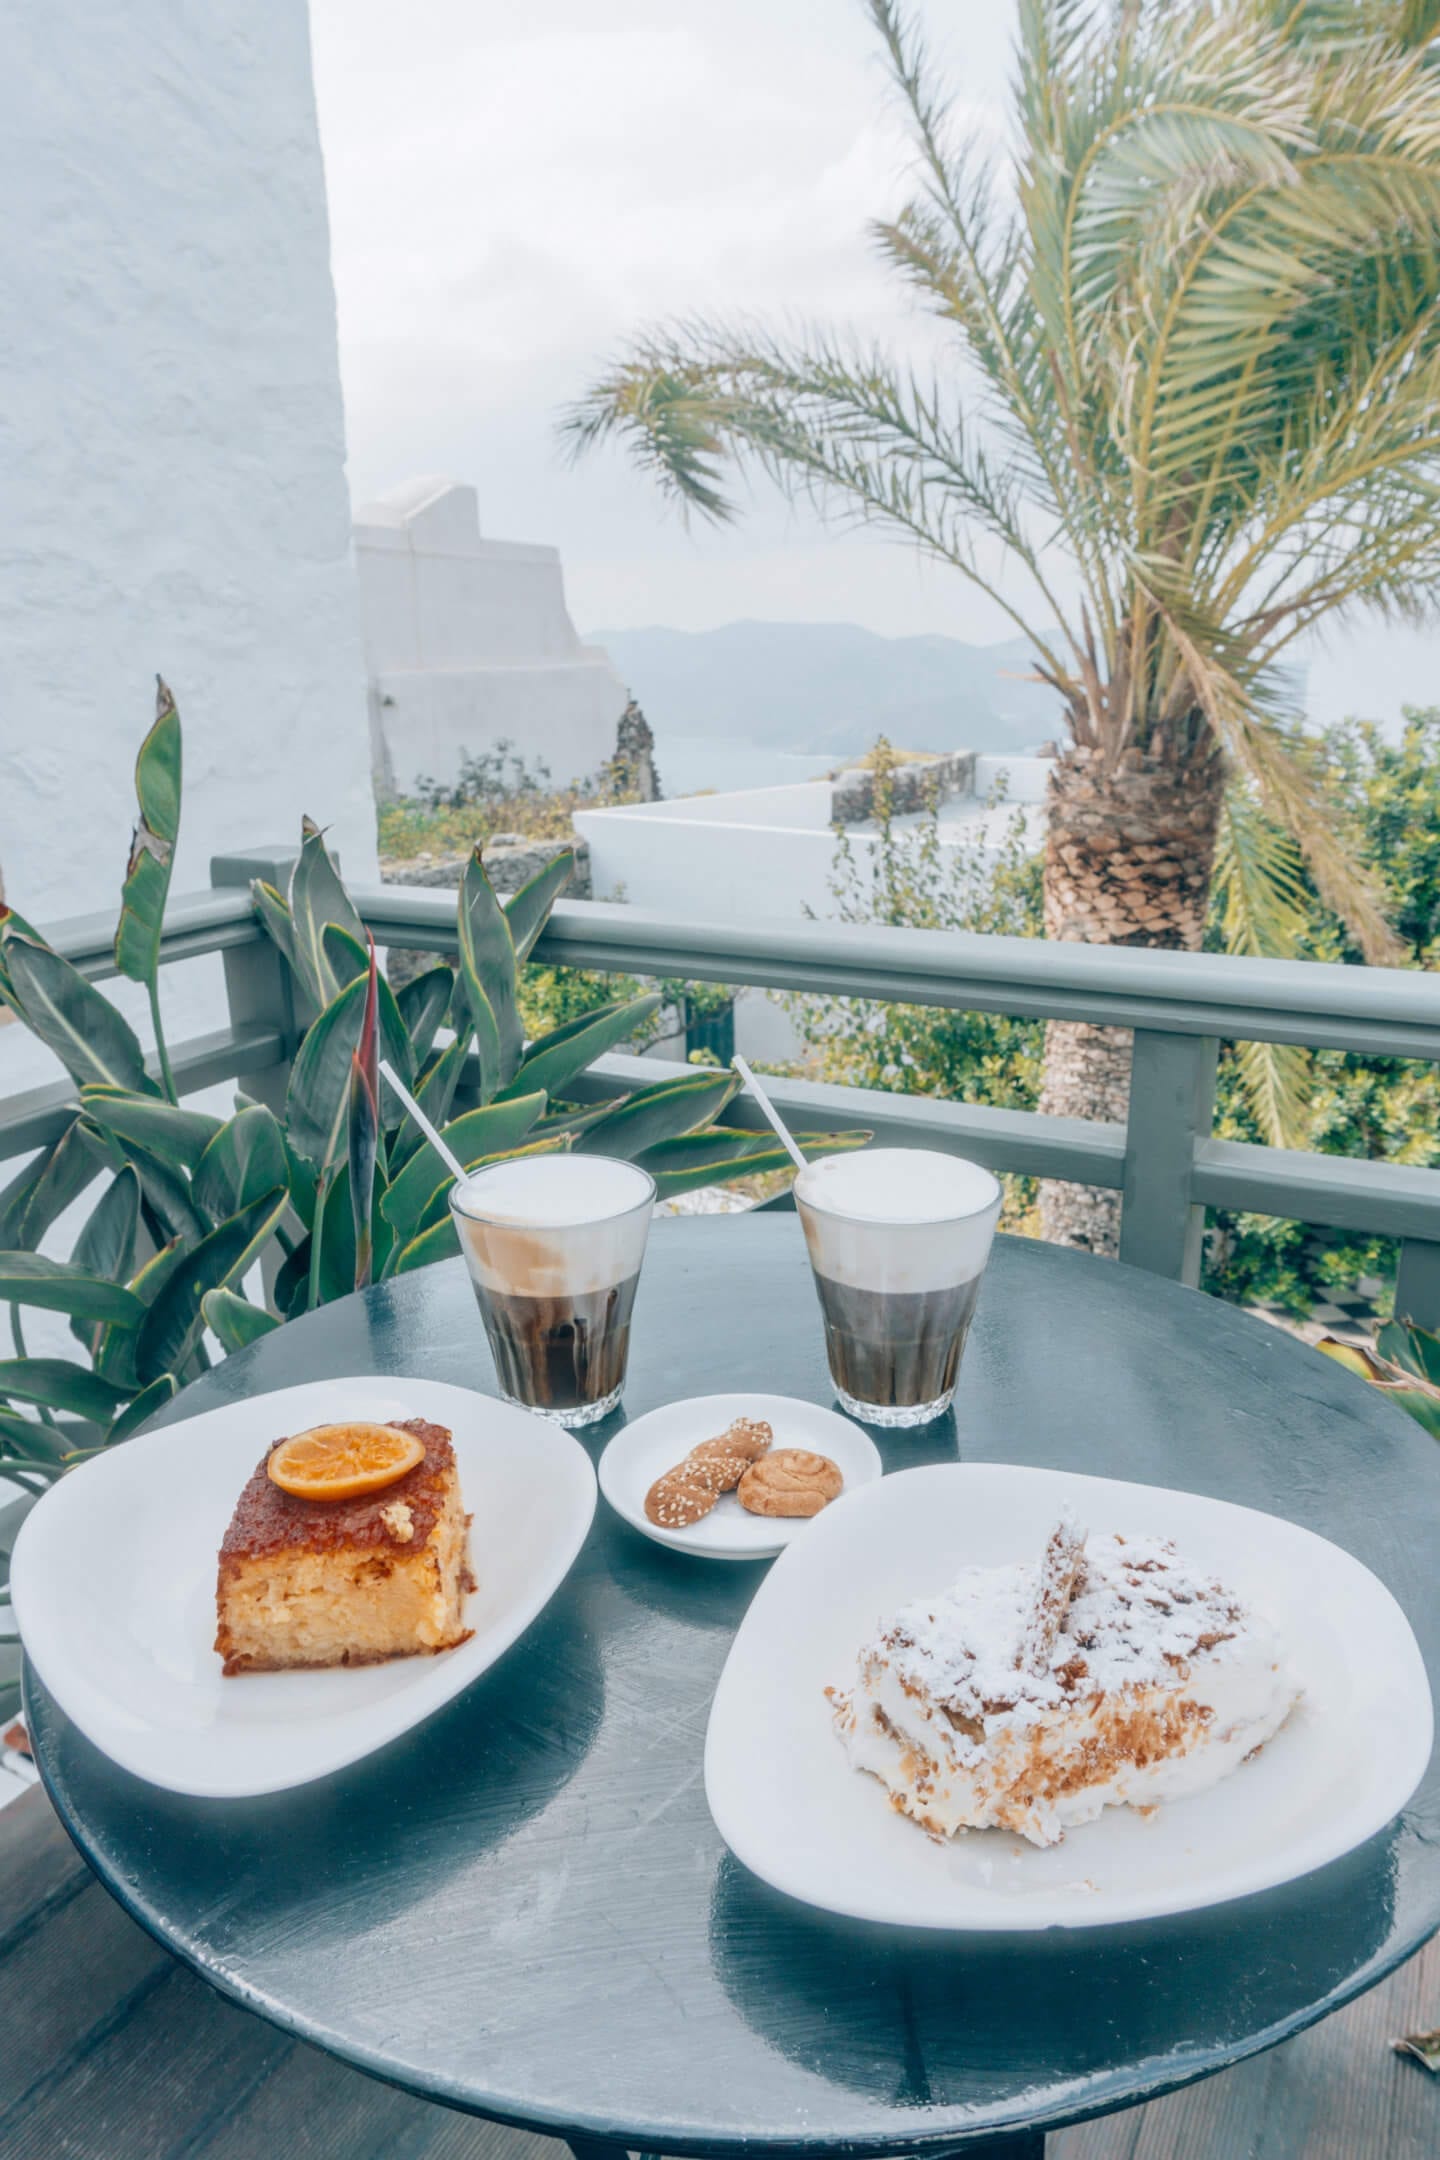 Freddo coffee and pastry with a sea view at Palaios Coffee in Milos